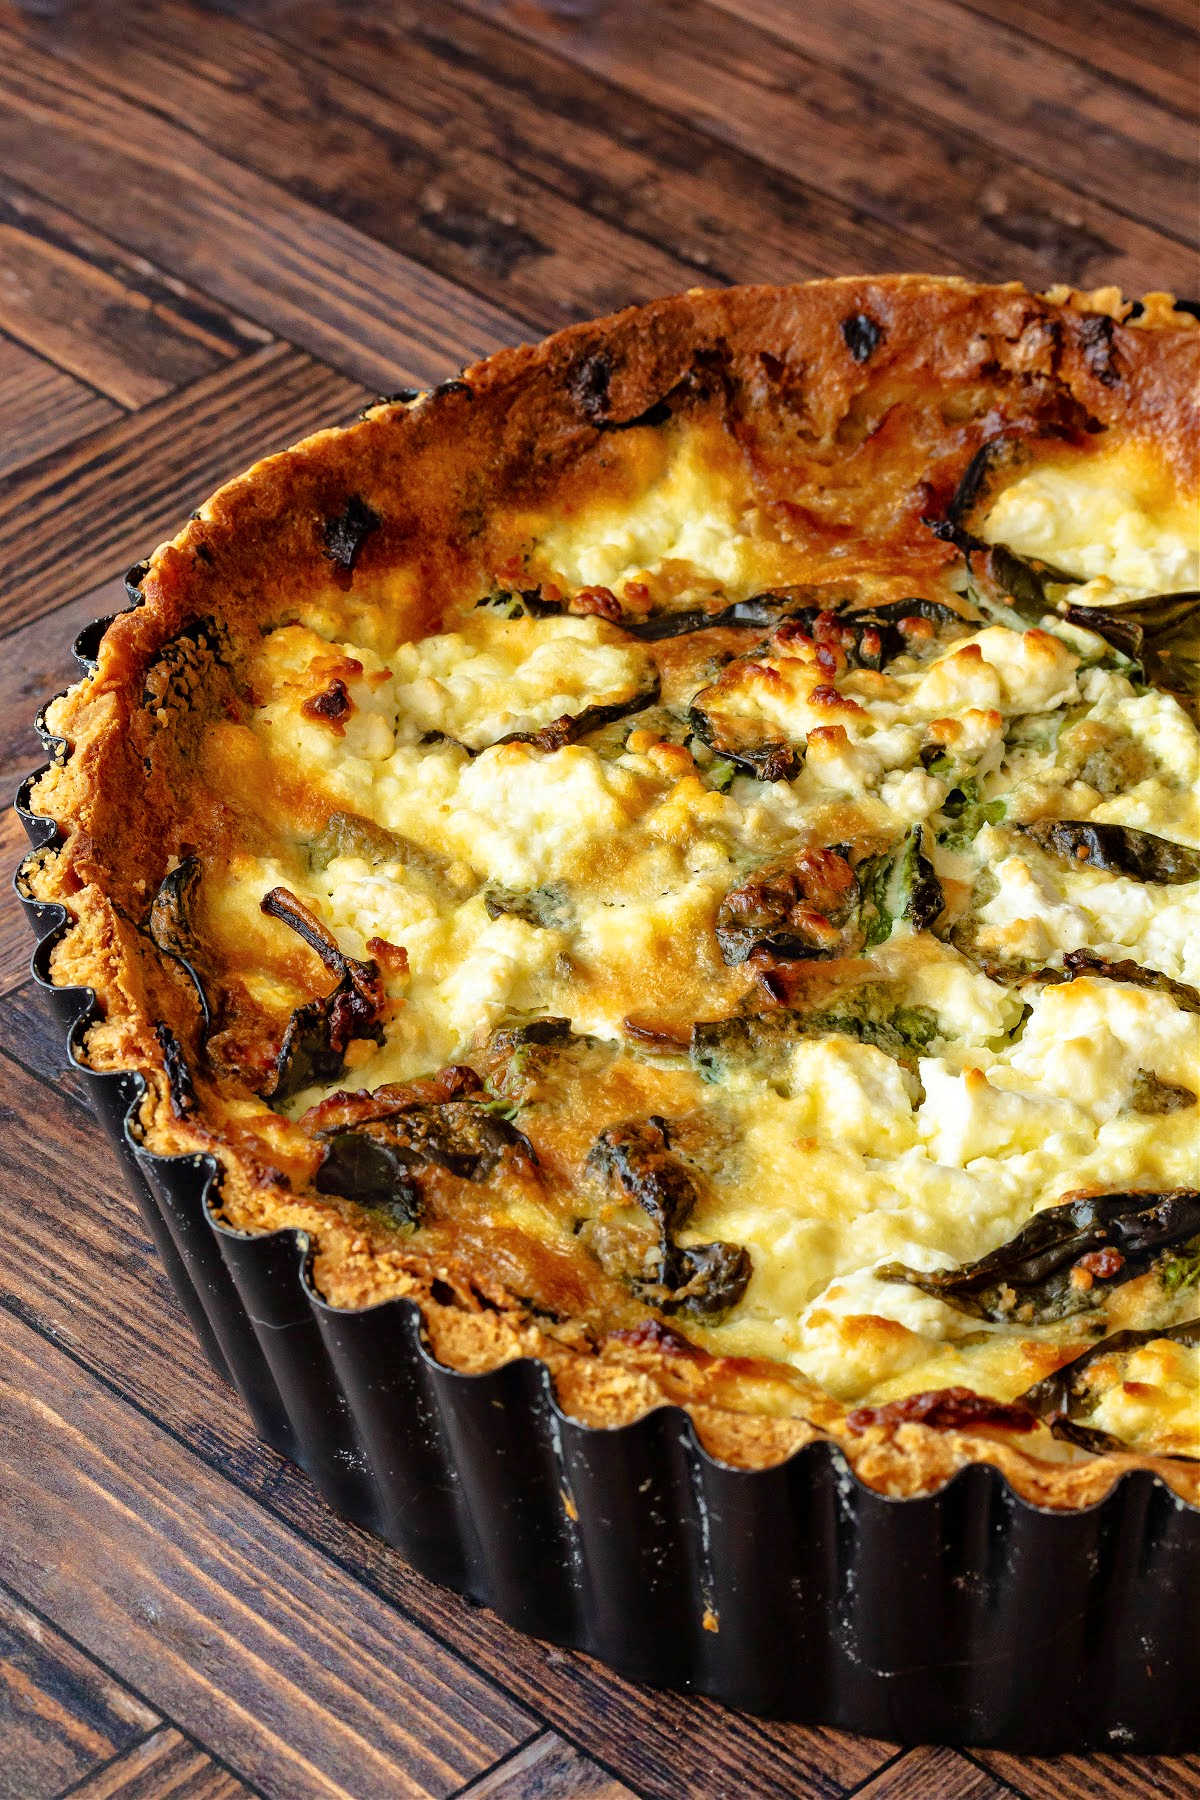 A whole quiche in a black, deep dish tart pan, fully baked. The top is deep golden brown and you can see spinach leaves and goat cheese peeking out of the custard.